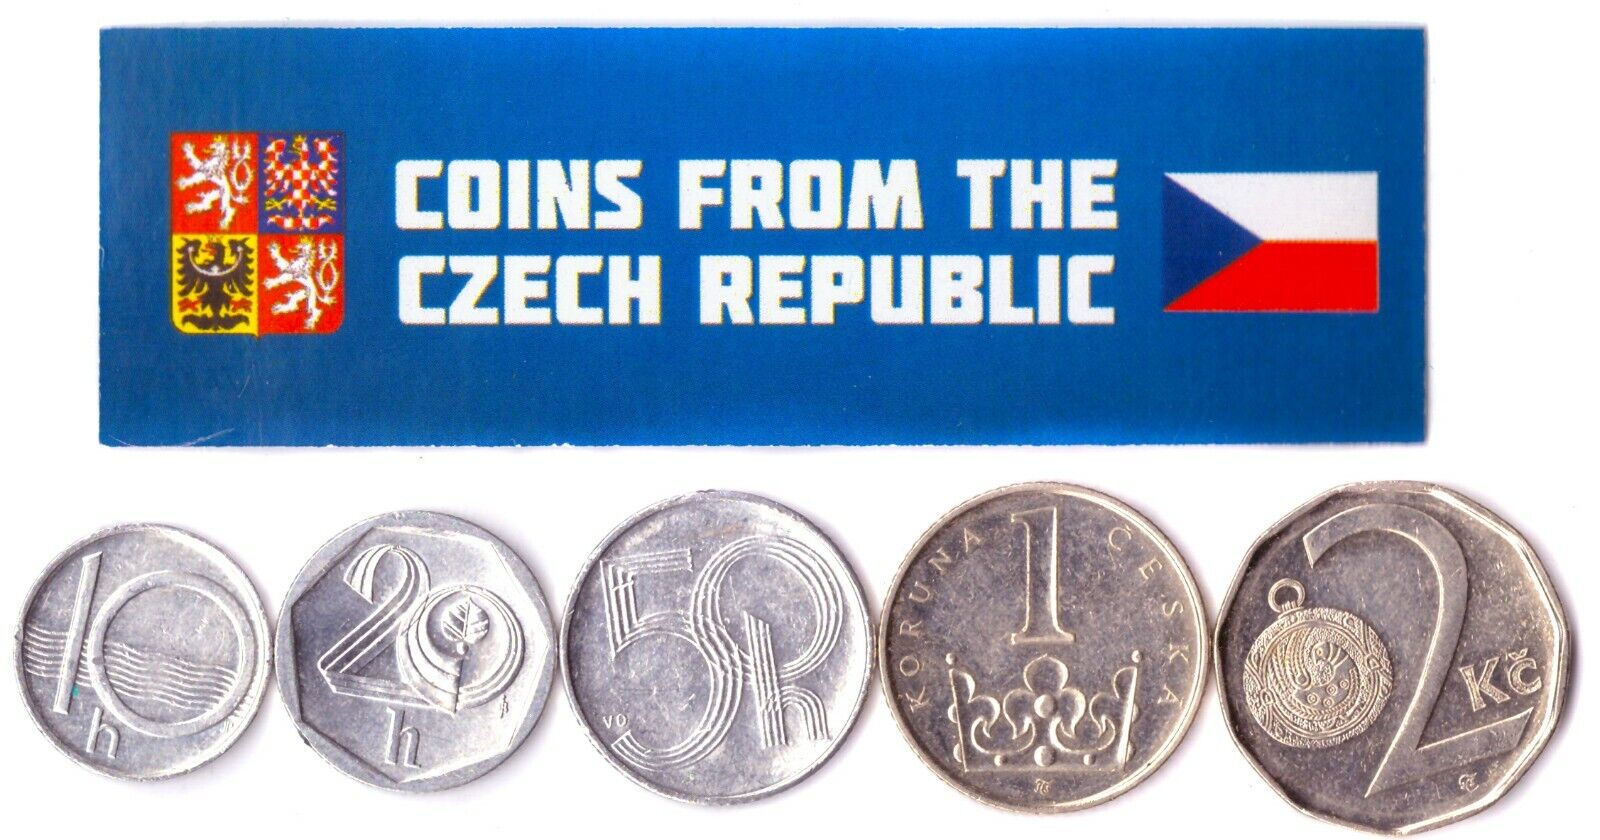 5 CZECH COINS DIFFERENT EUROPEAN COINS FOREIGN CURRENCY, VALUABLE MONEY Без бренда - фотография #2